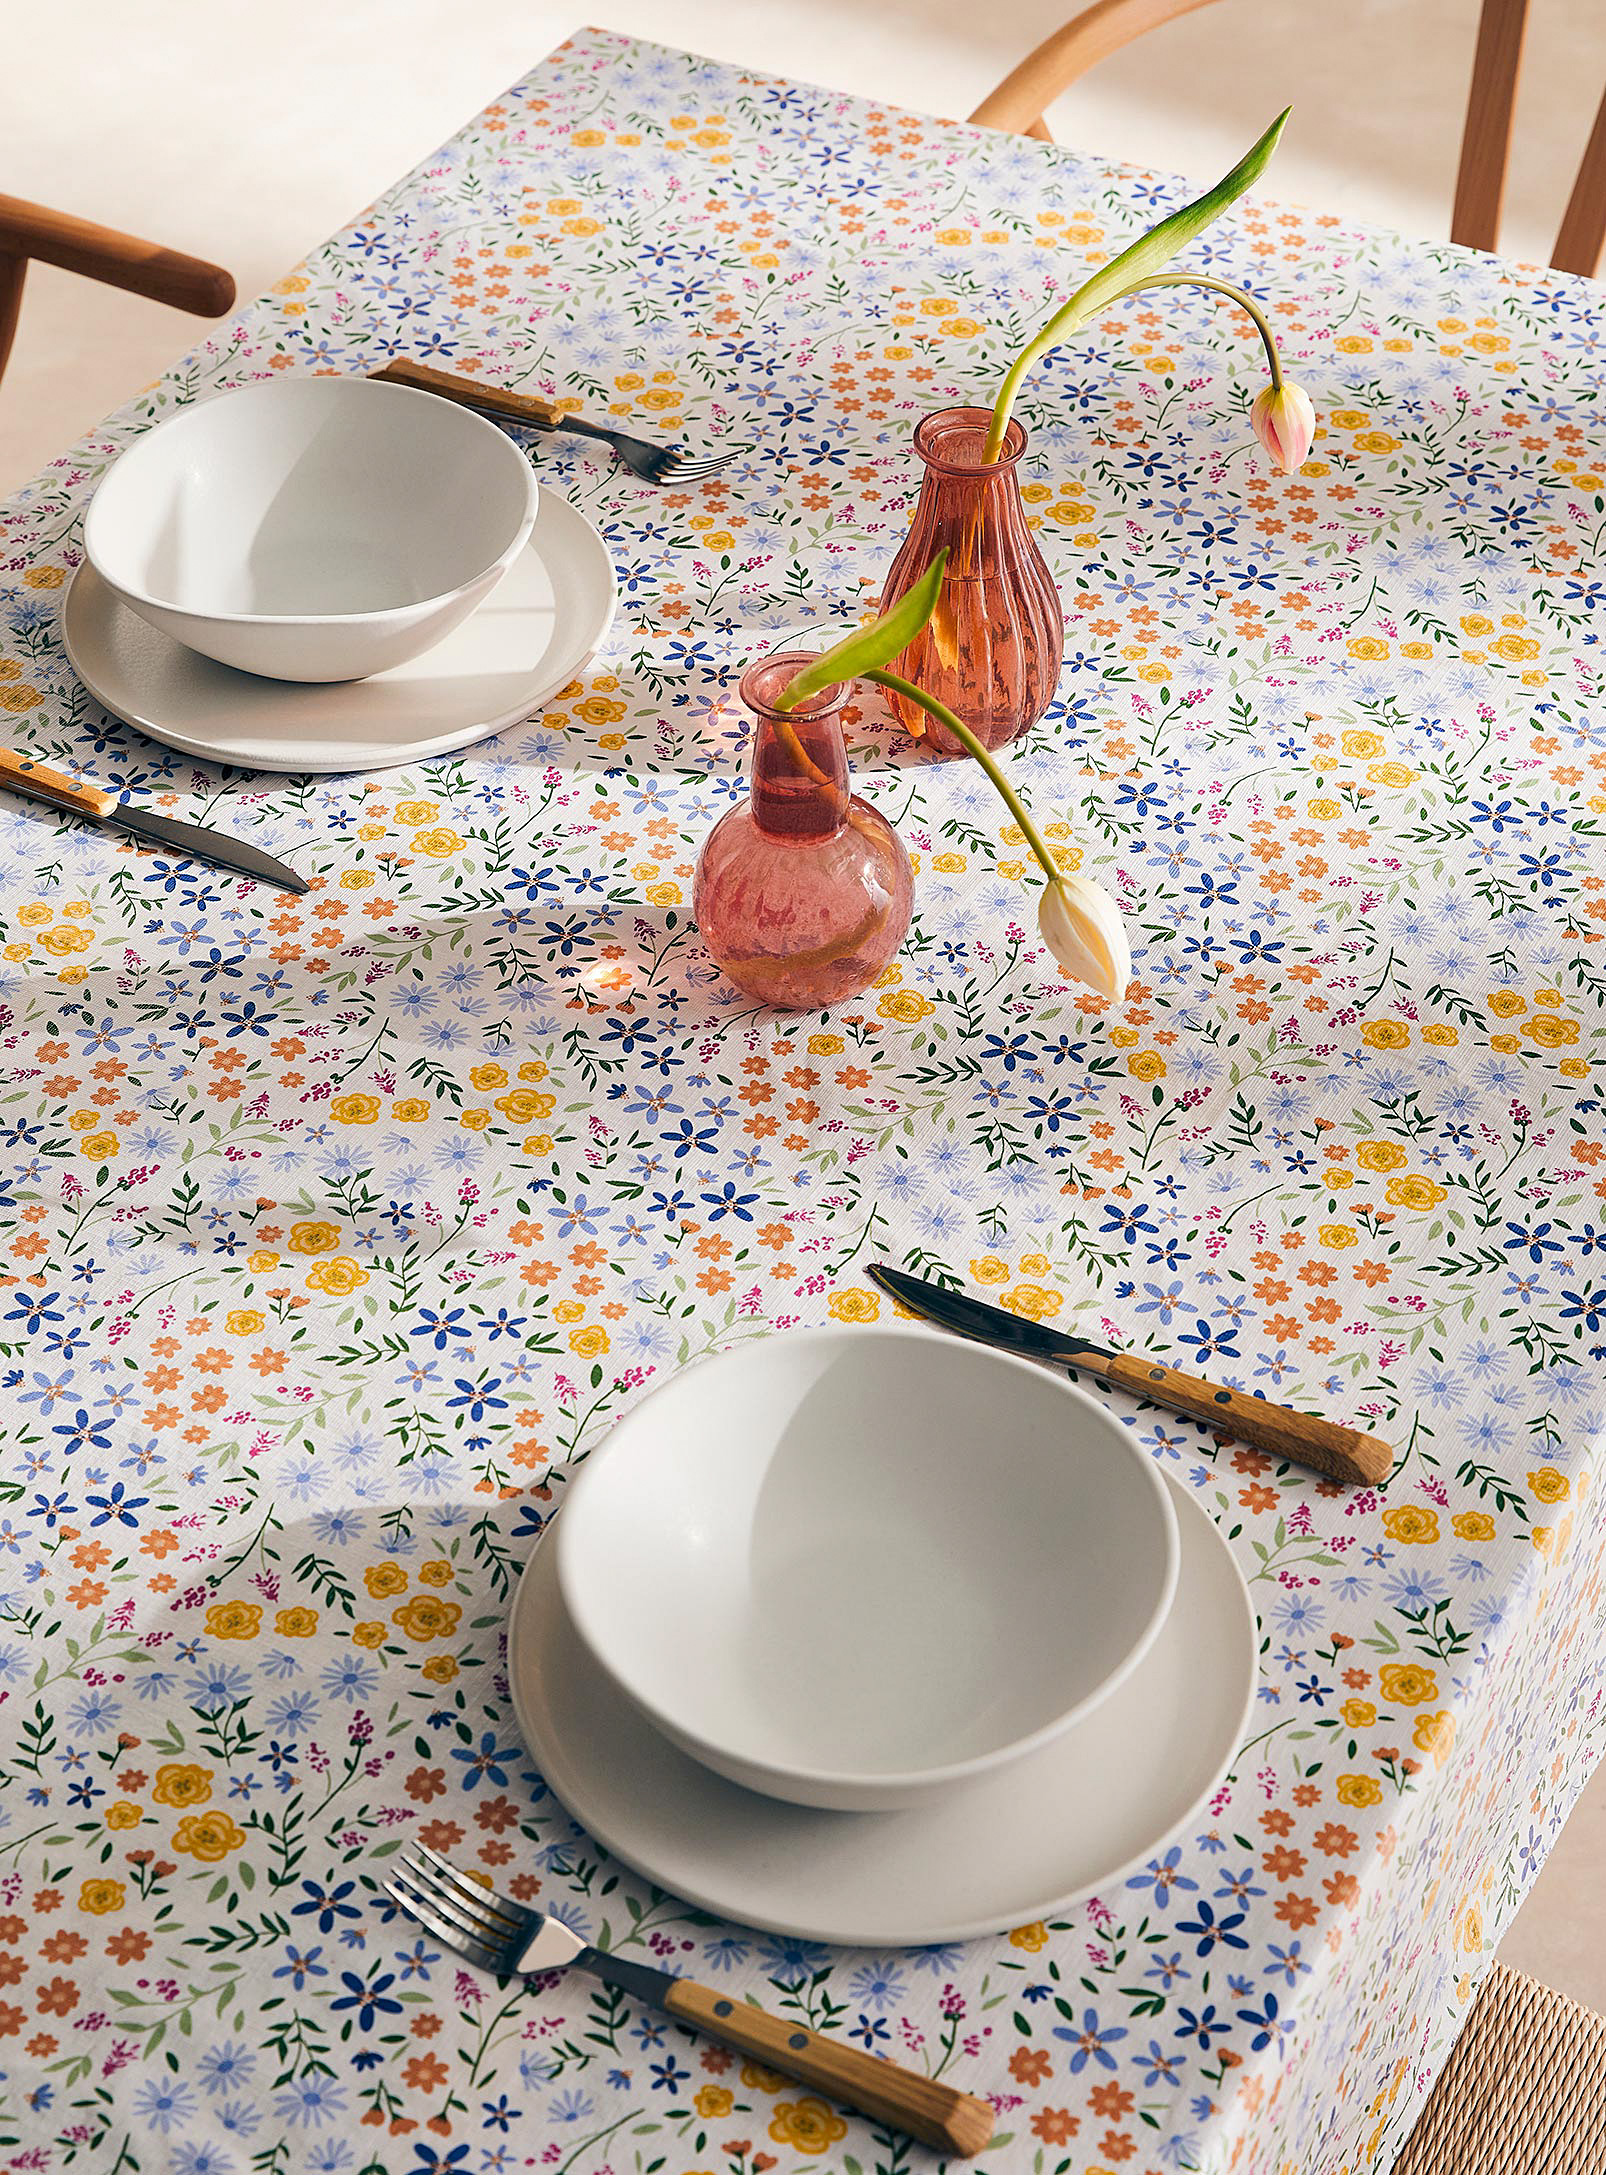 Simons Maison Countryside Flowers Vinyl Tablecloth In Patterned White